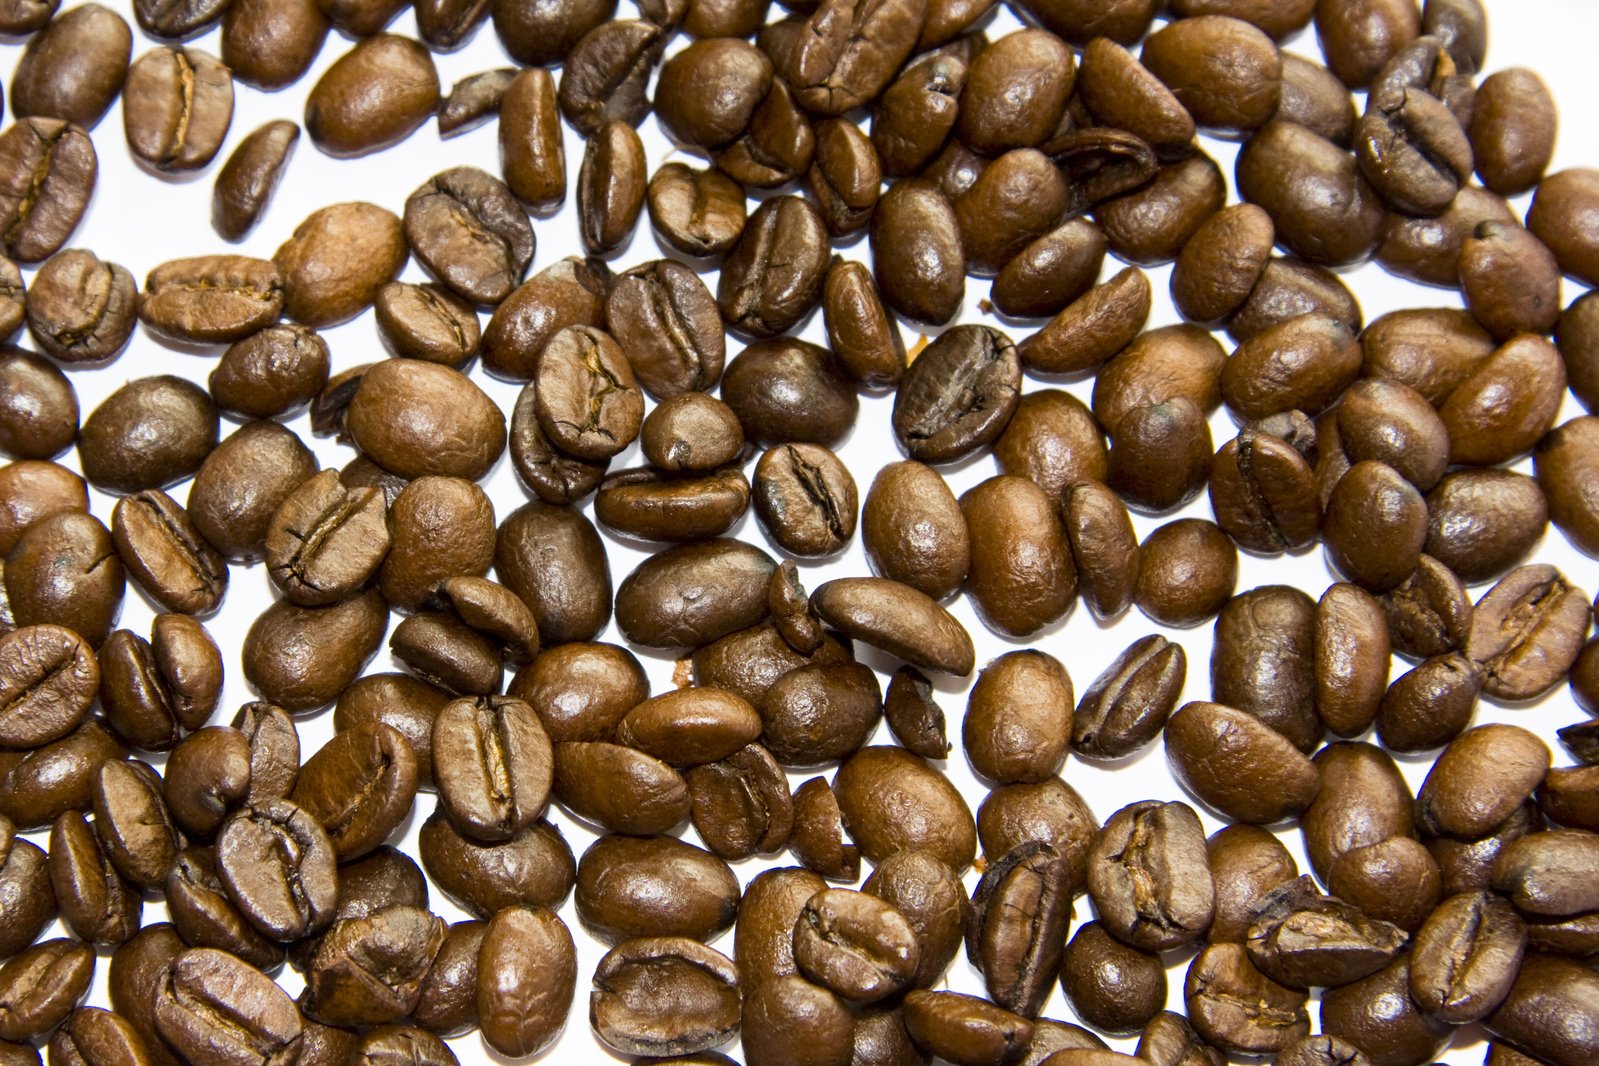 several different kinds of coffee beans are spilled over